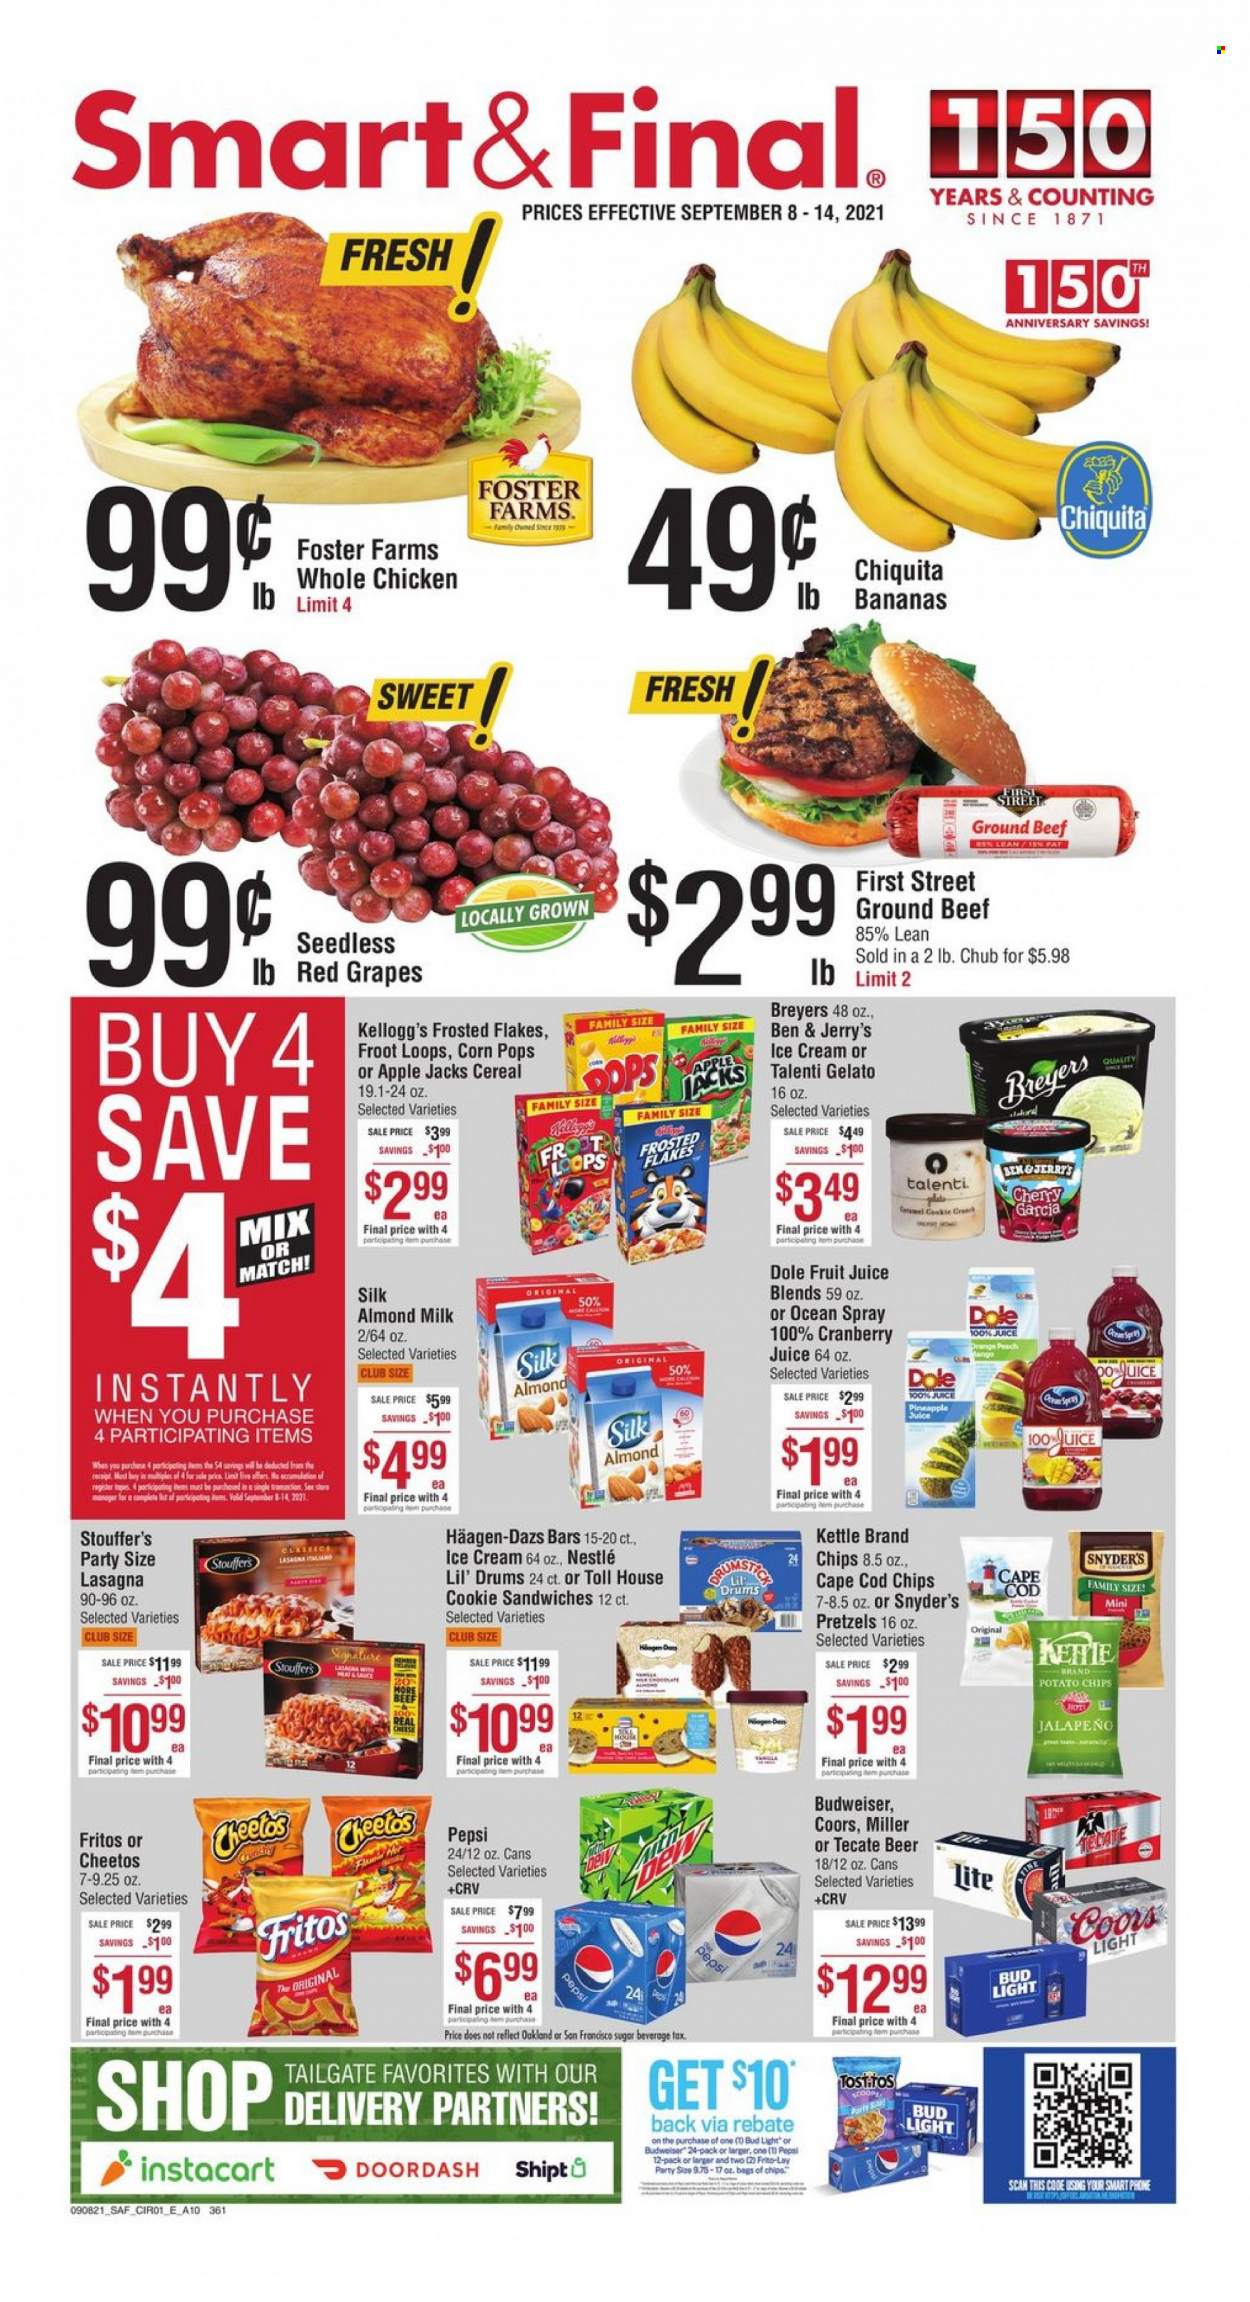 thumbnail - Smart & Final Flyer - 09/08/2021 - 09/14/2021 - Sales products - pretzels, Dole, jalapeño, grapes, pineapple, cod, sandwich, lasagna meal, almond milk, ice cream, Häagen-Dazs, Ben & Jerry's, Talenti Gelato, gelato, Stouffer's, Nestlé, Kellogg's, Fritos, potato chips, Cheetos, chips, Tostitos, cereals, Frosted Flakes, Corn Pops, cranberry juice, pineapple juice, Pepsi, juice, fruit juice, beer, Bud Light, Miller, whole chicken, beef meat, ground beef, Budweiser, Coors. Page 1.